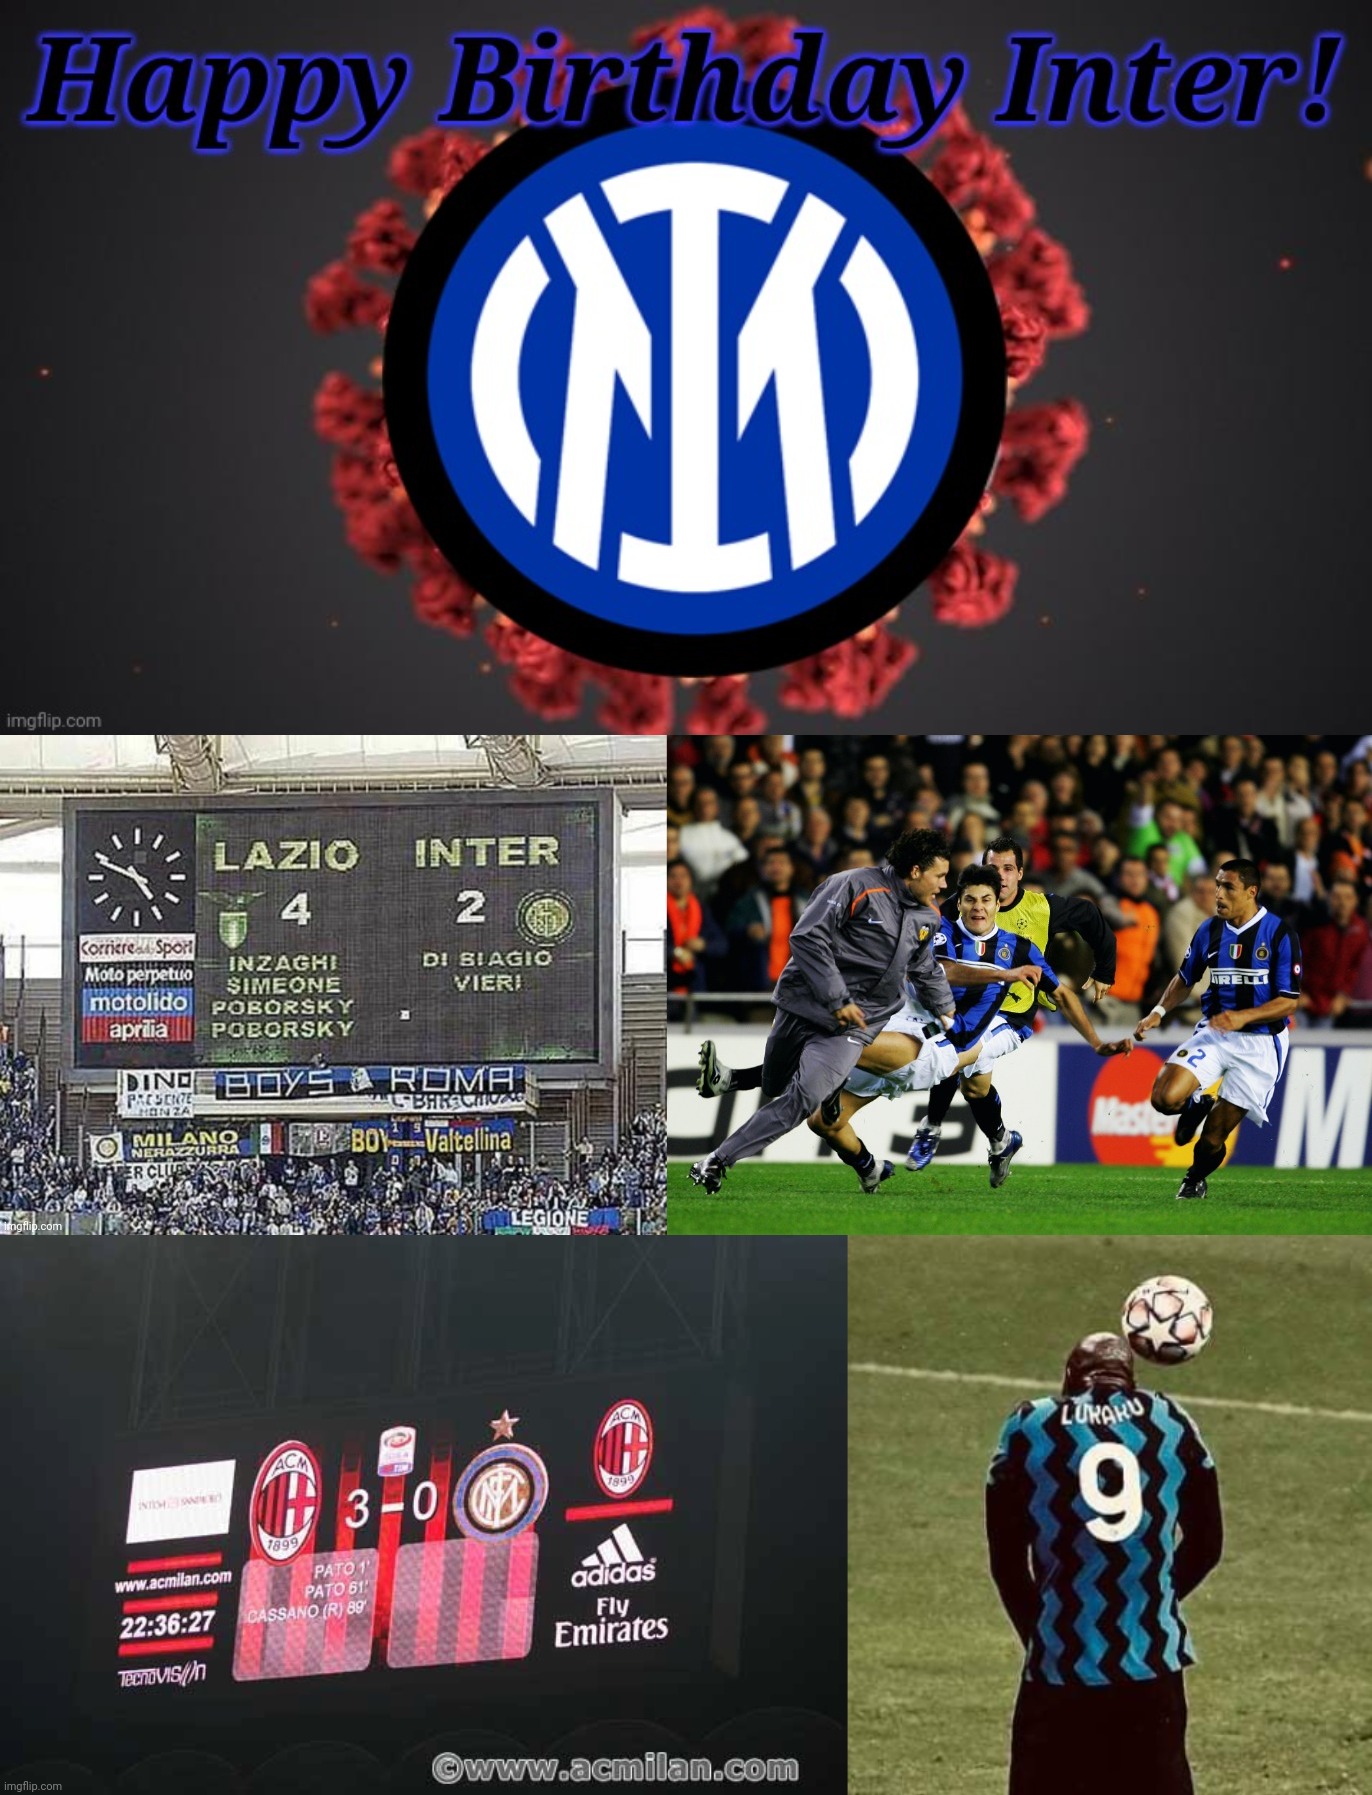 Just kidding, just for fun :D | image tagged in inter,memes,funny,football,soccer,calcio | made w/ Imgflip meme maker